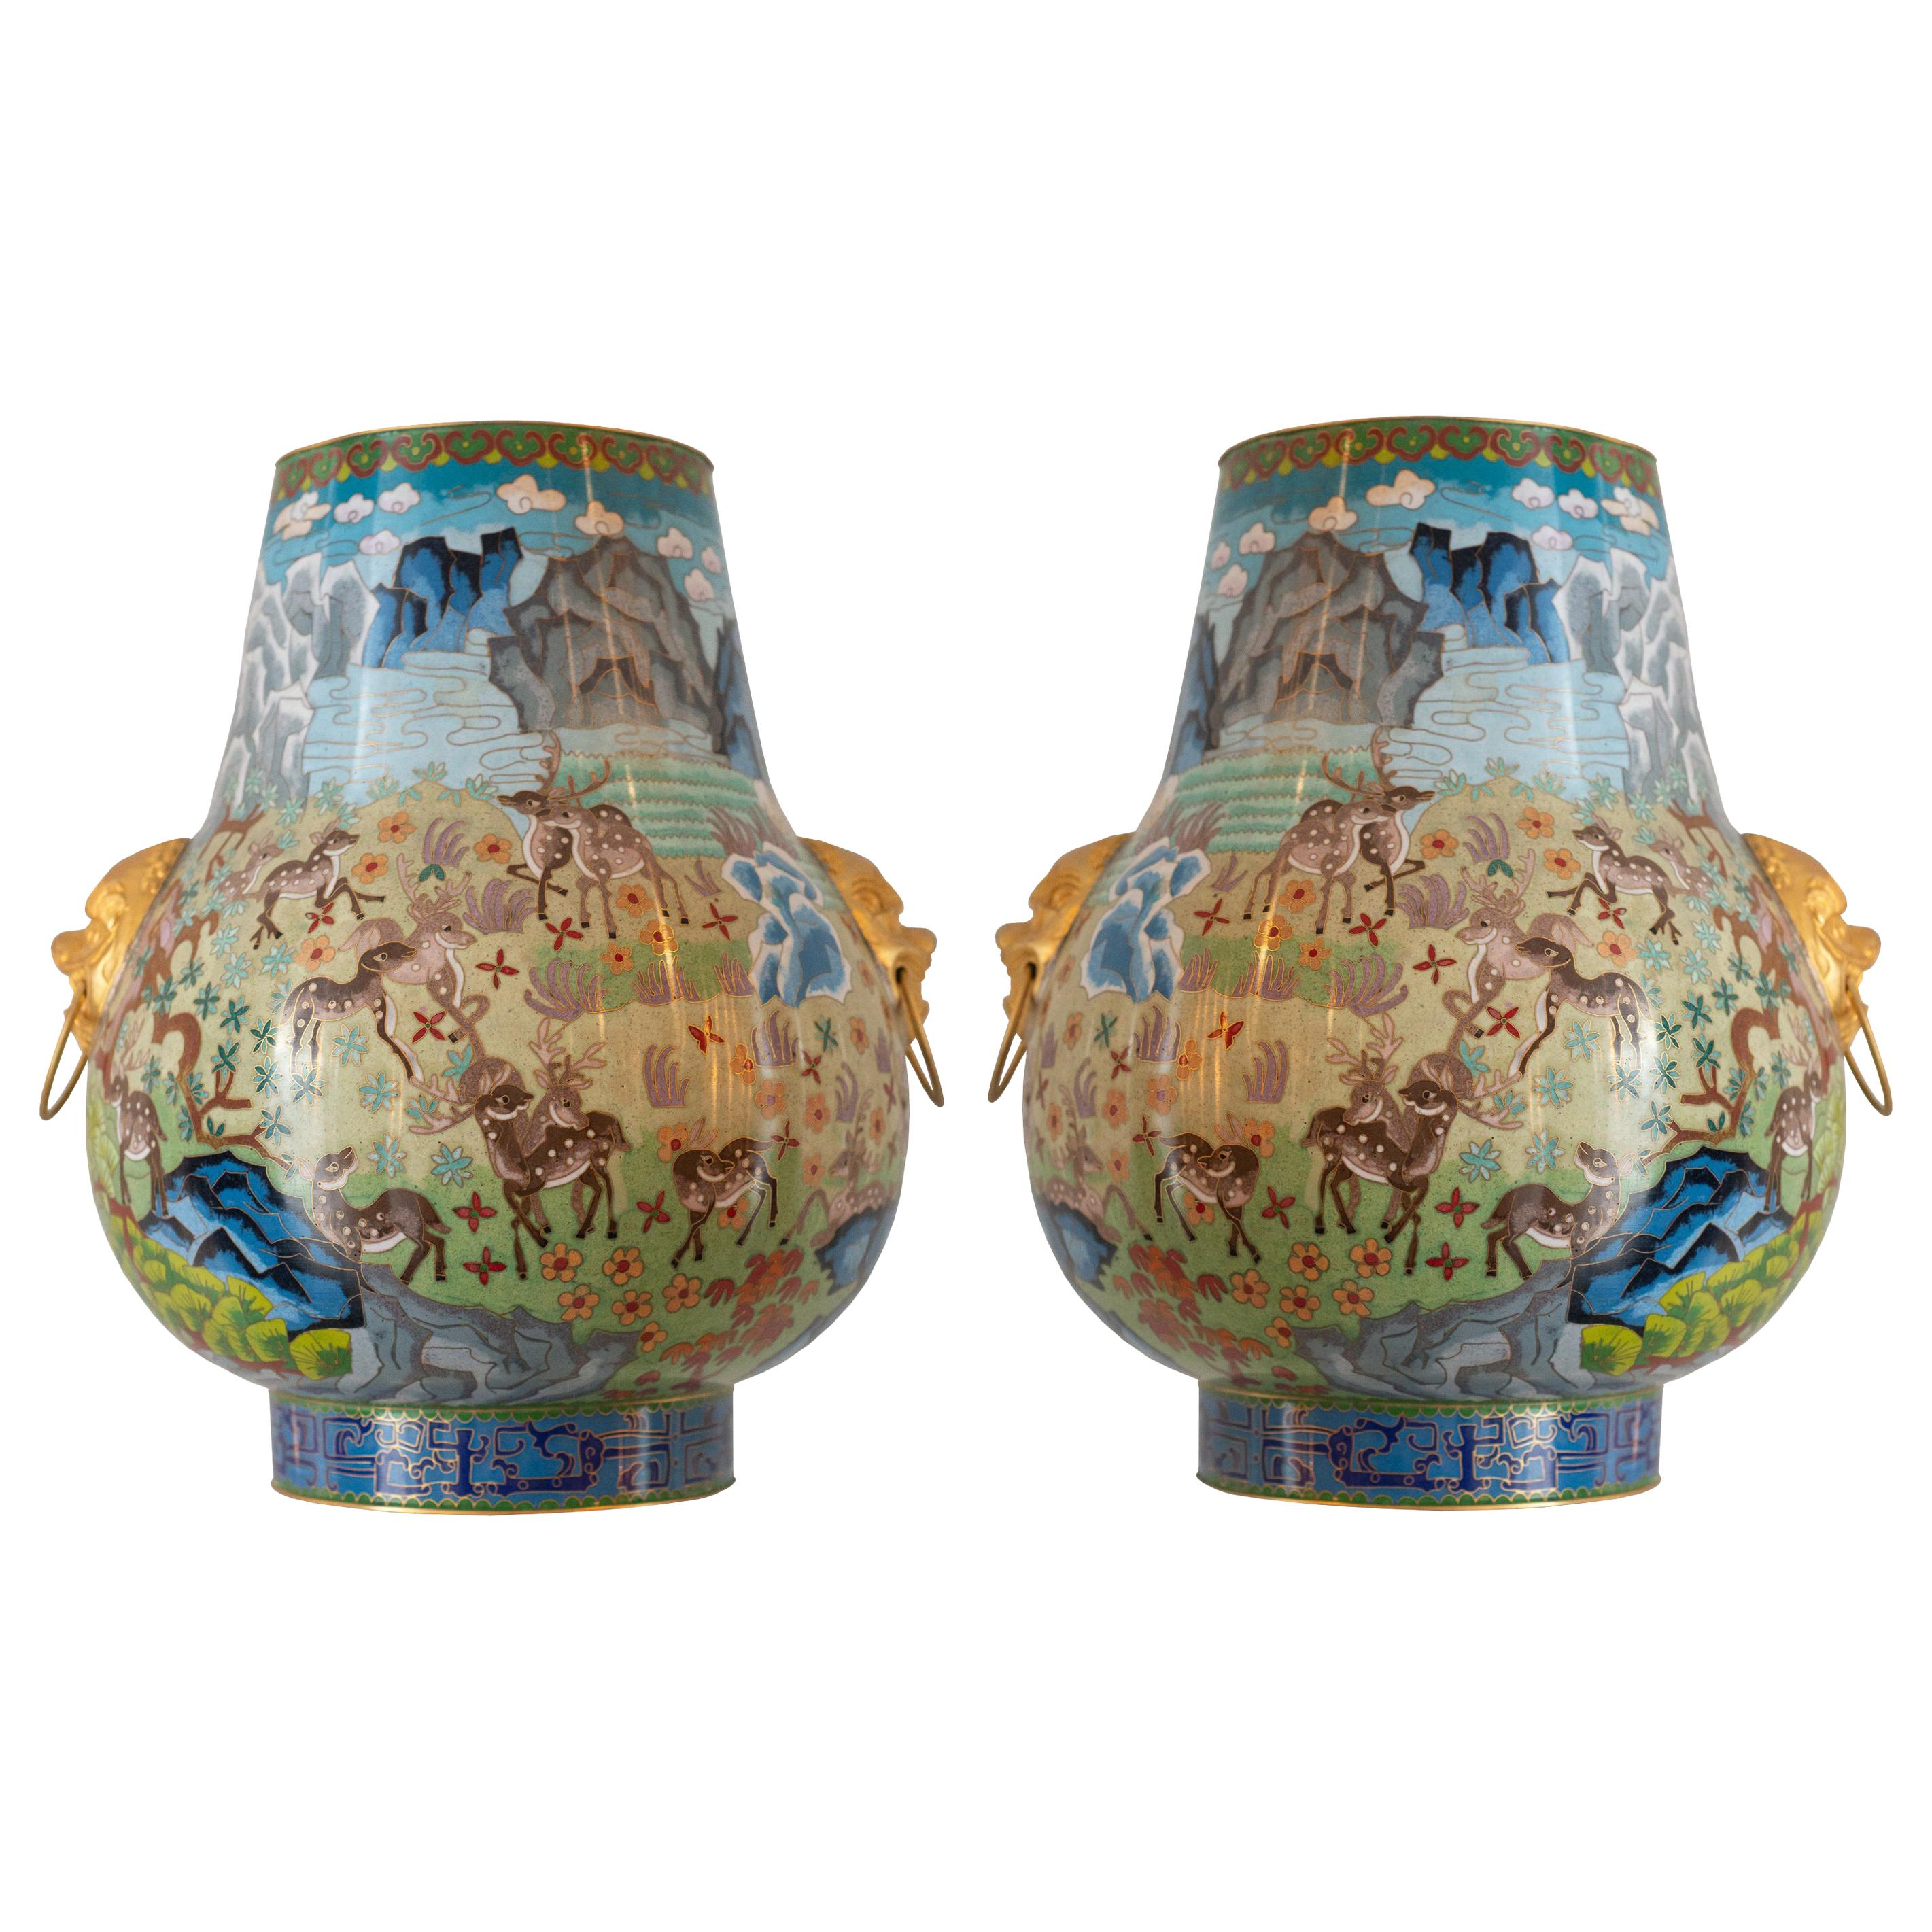 Antique Grand Pair of Cloisonné Urns with Woodland Scene